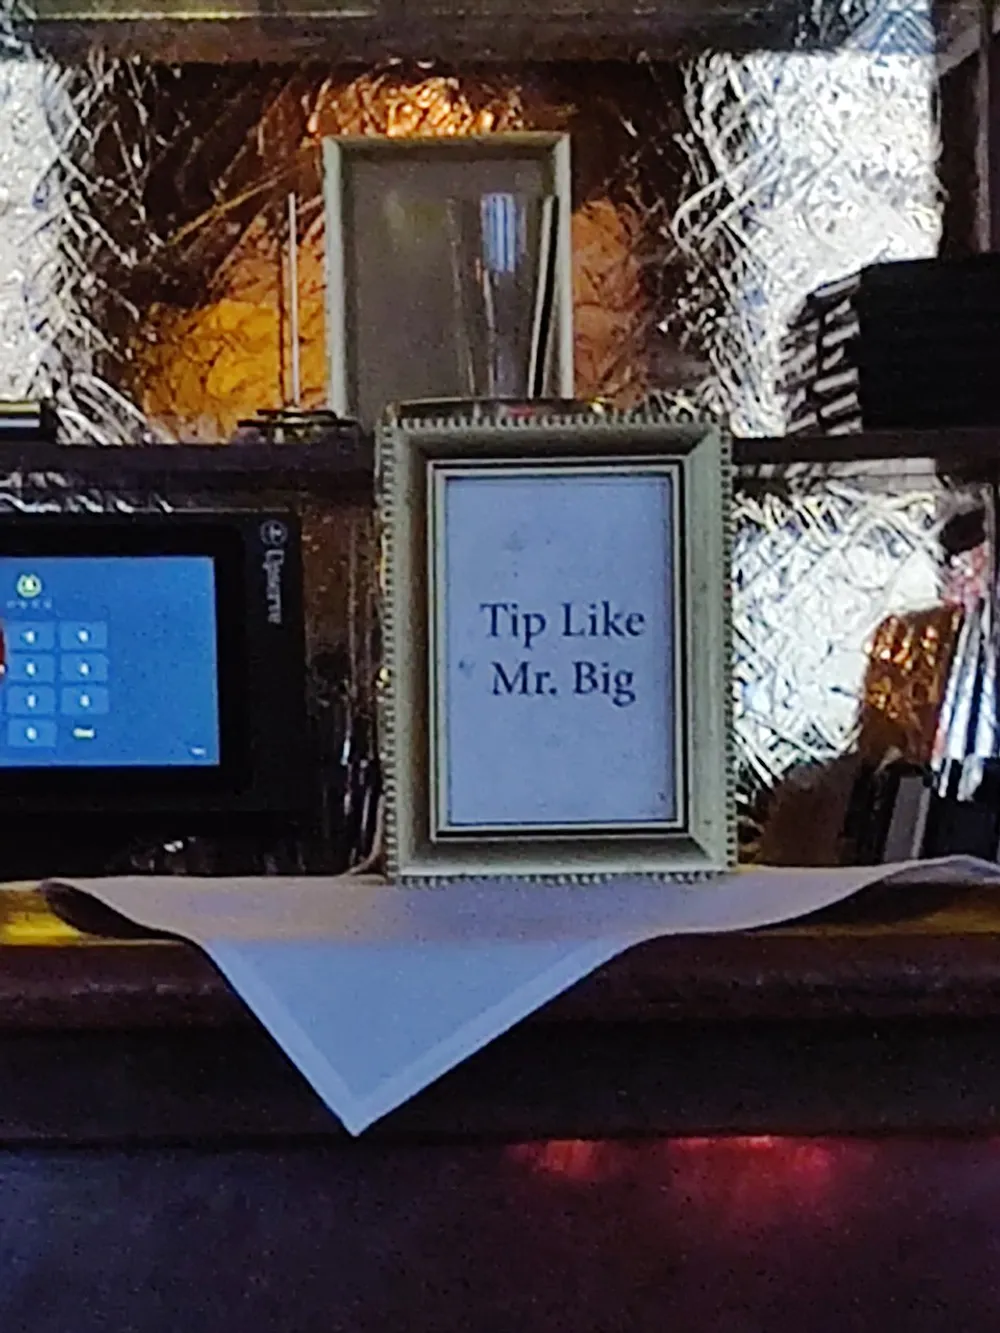 The image shows a sign placed on a counter with the words Tip Like Mr Big suggesting customers should leave generous tips